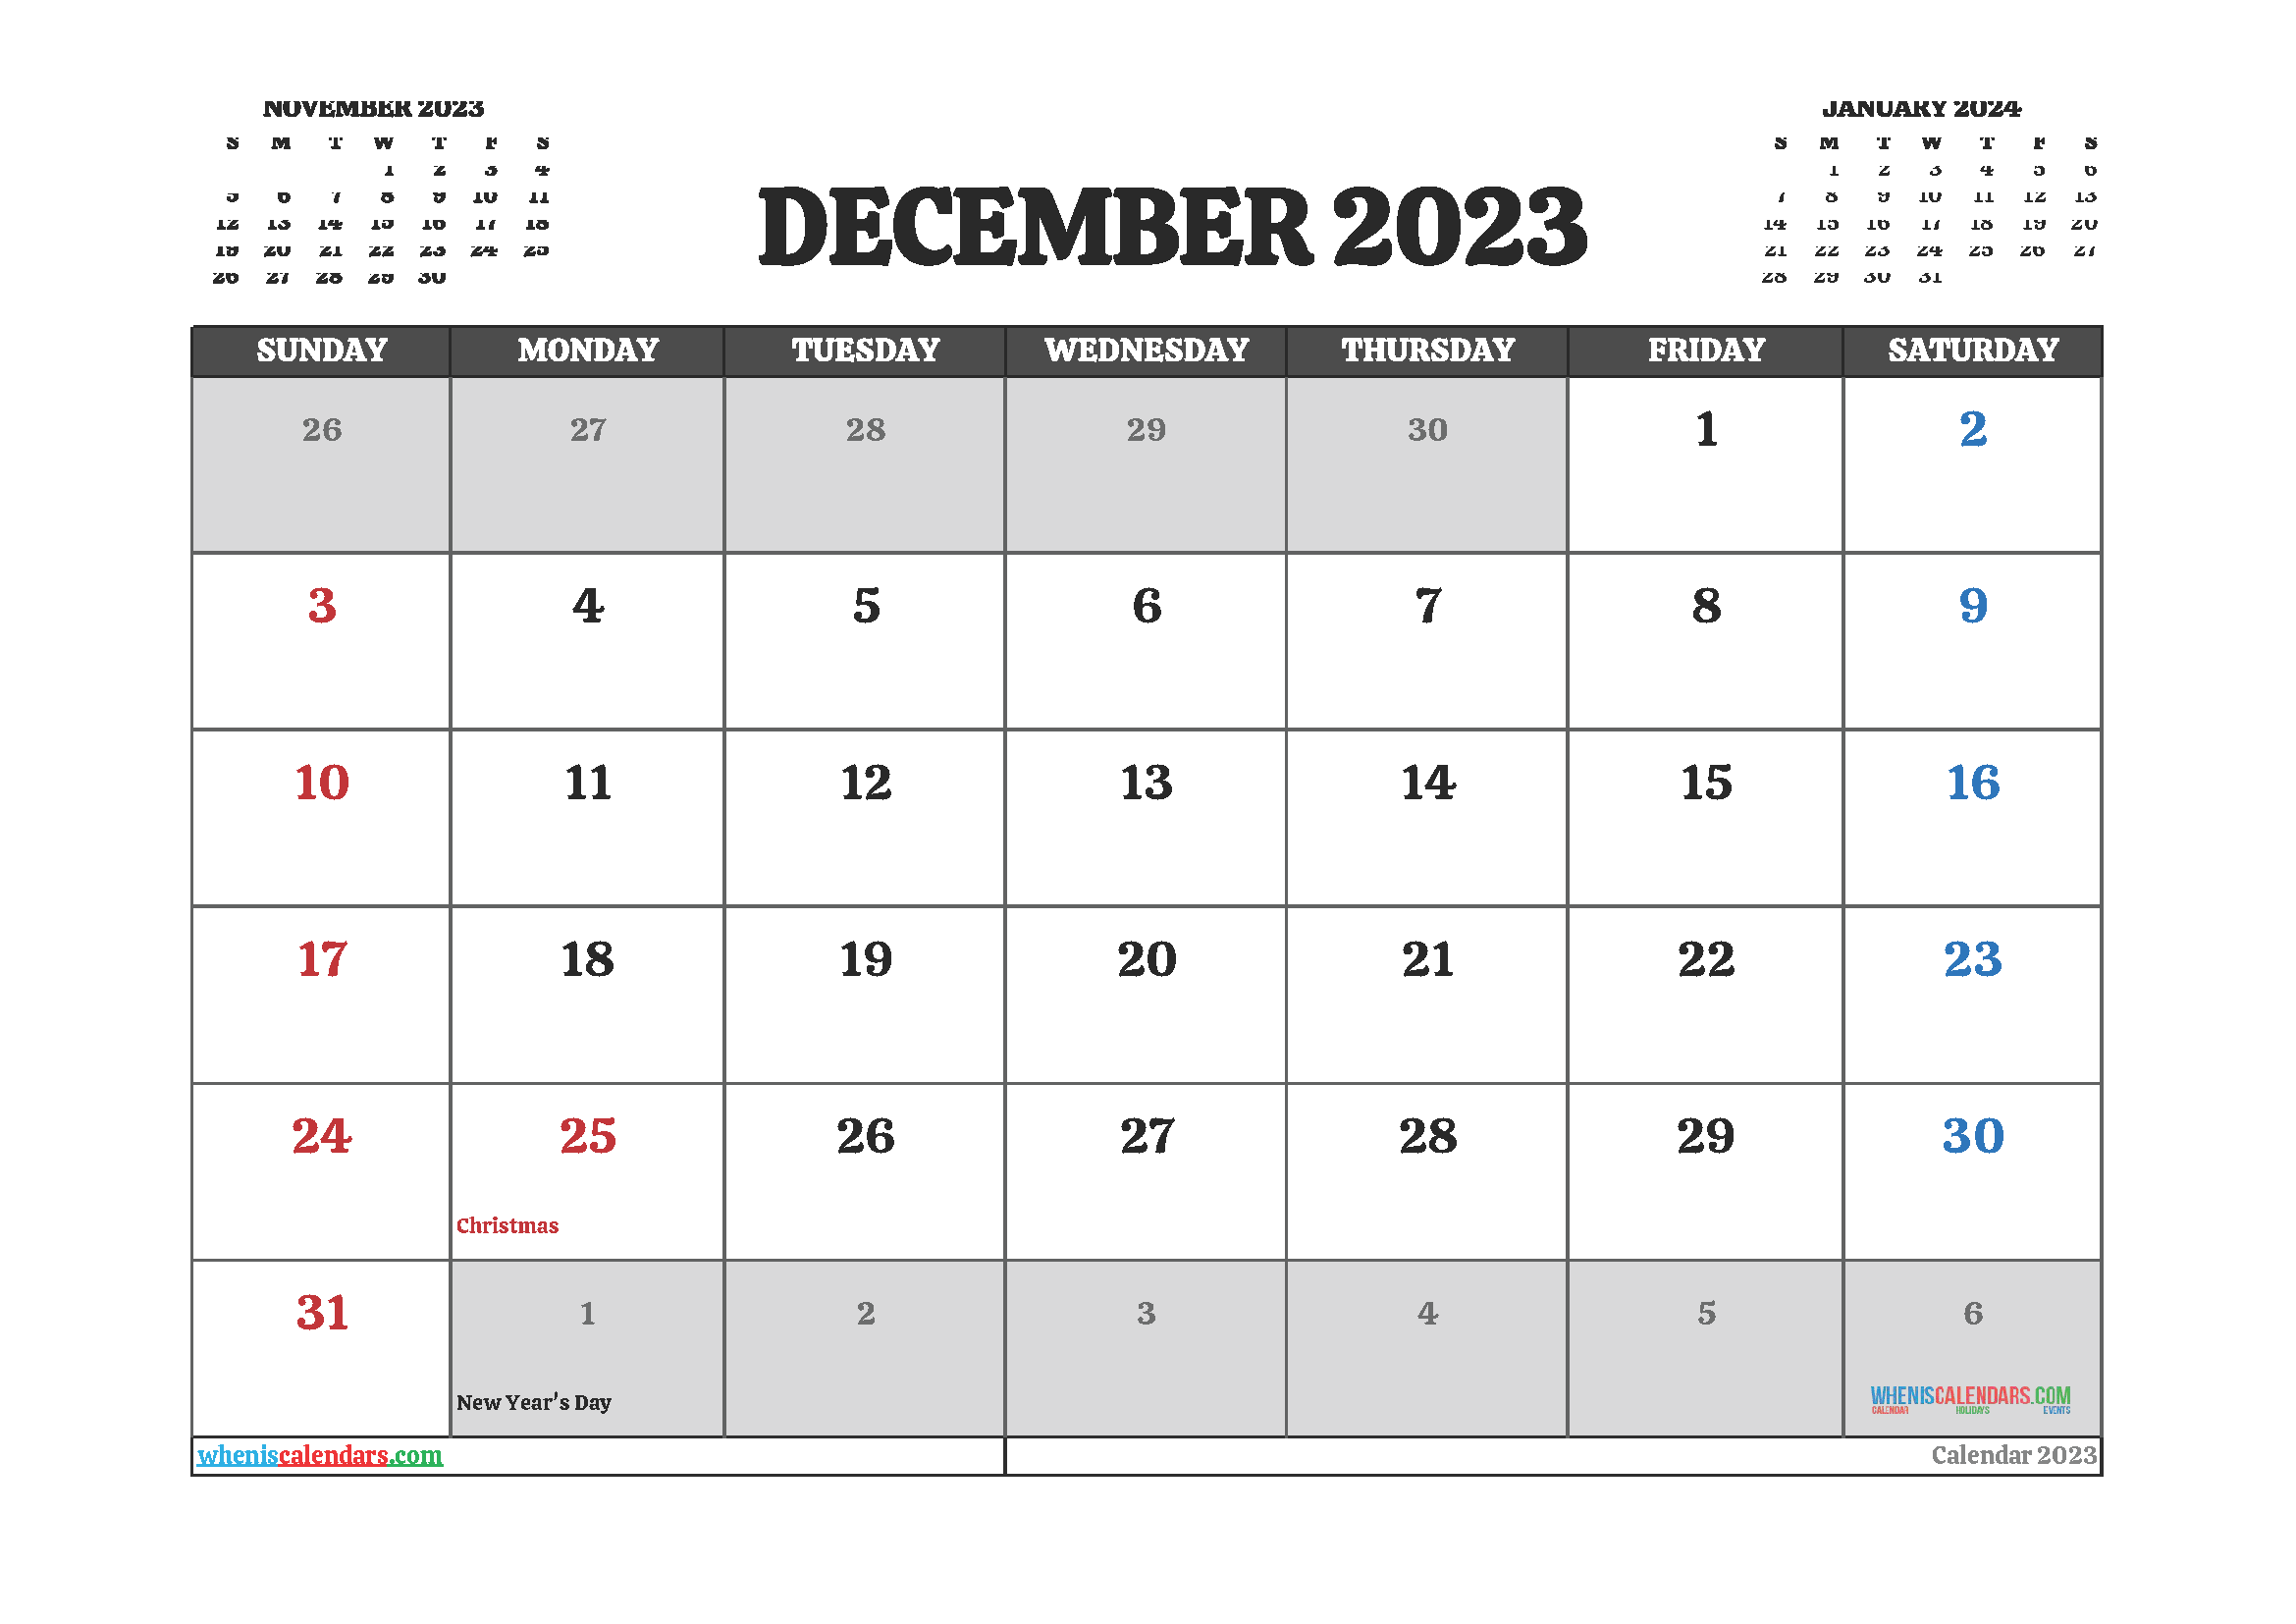 show-me-the-month-of-december-calendar-2023-best-amazing-list-of-seaside-calendar-of-events-2023